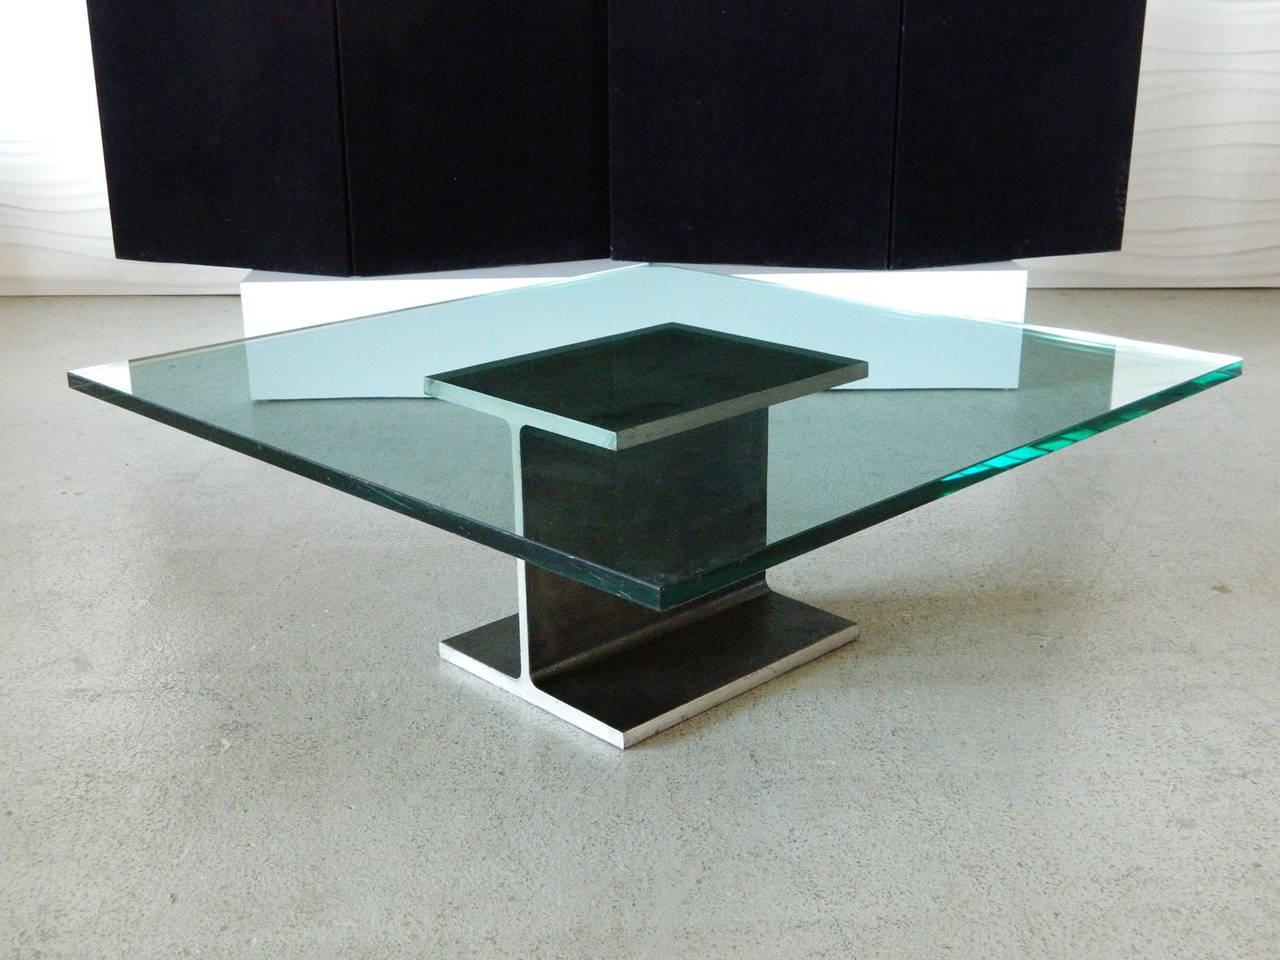 IBeam Coffee Table in the style of Ward For Sale at 1stdibs